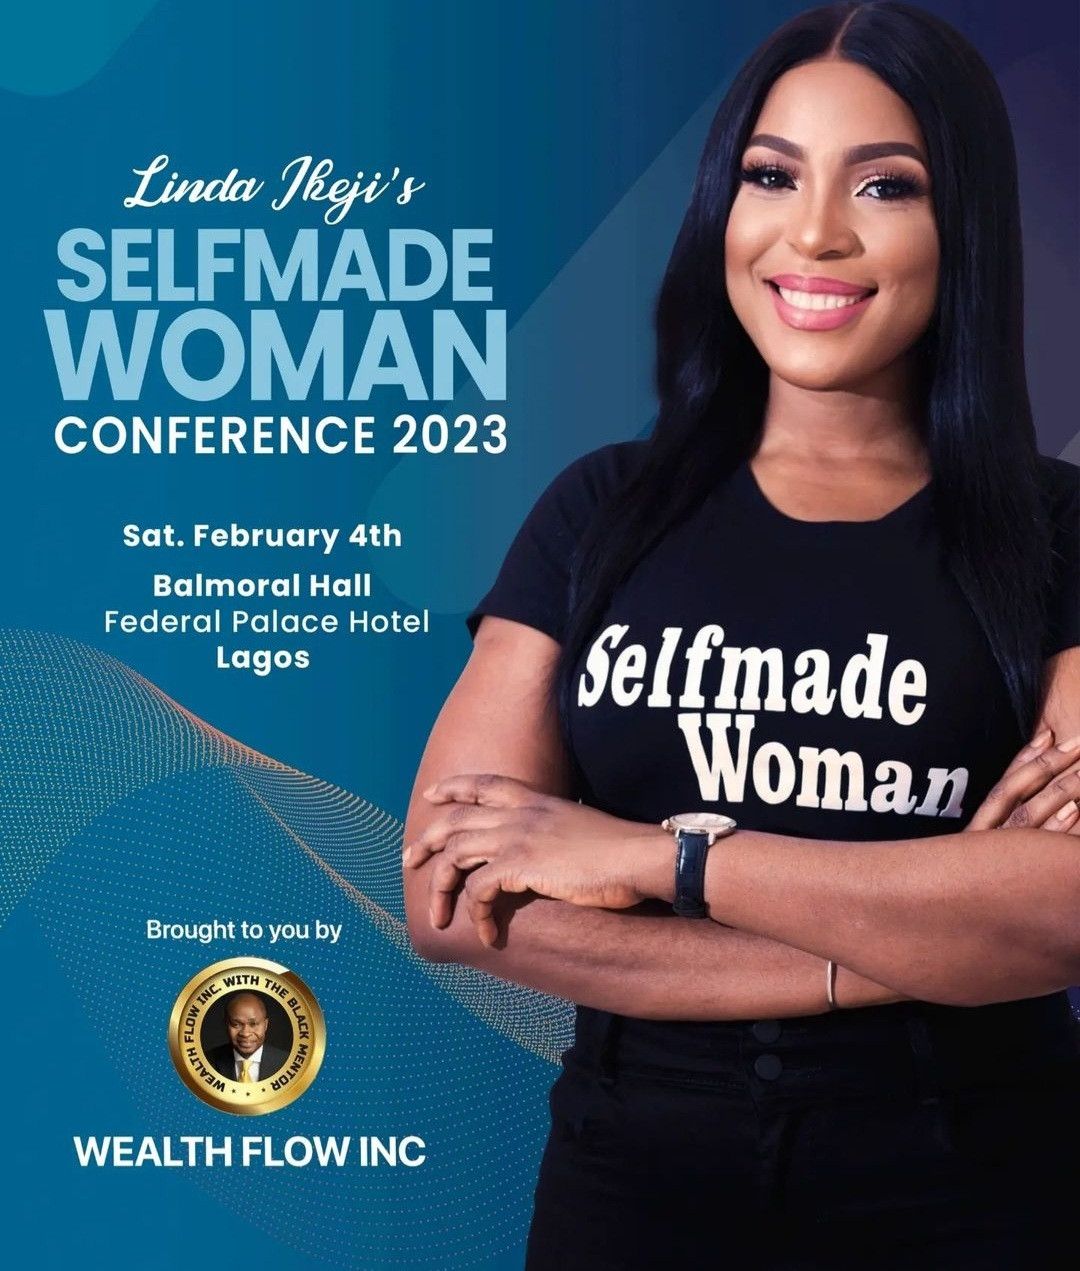 Mo Abudu, Funmi Iyanda, Betty Irabor and extra phenomenal girls to talk on the 2023 Selfmade Girl Convention (see particulars)